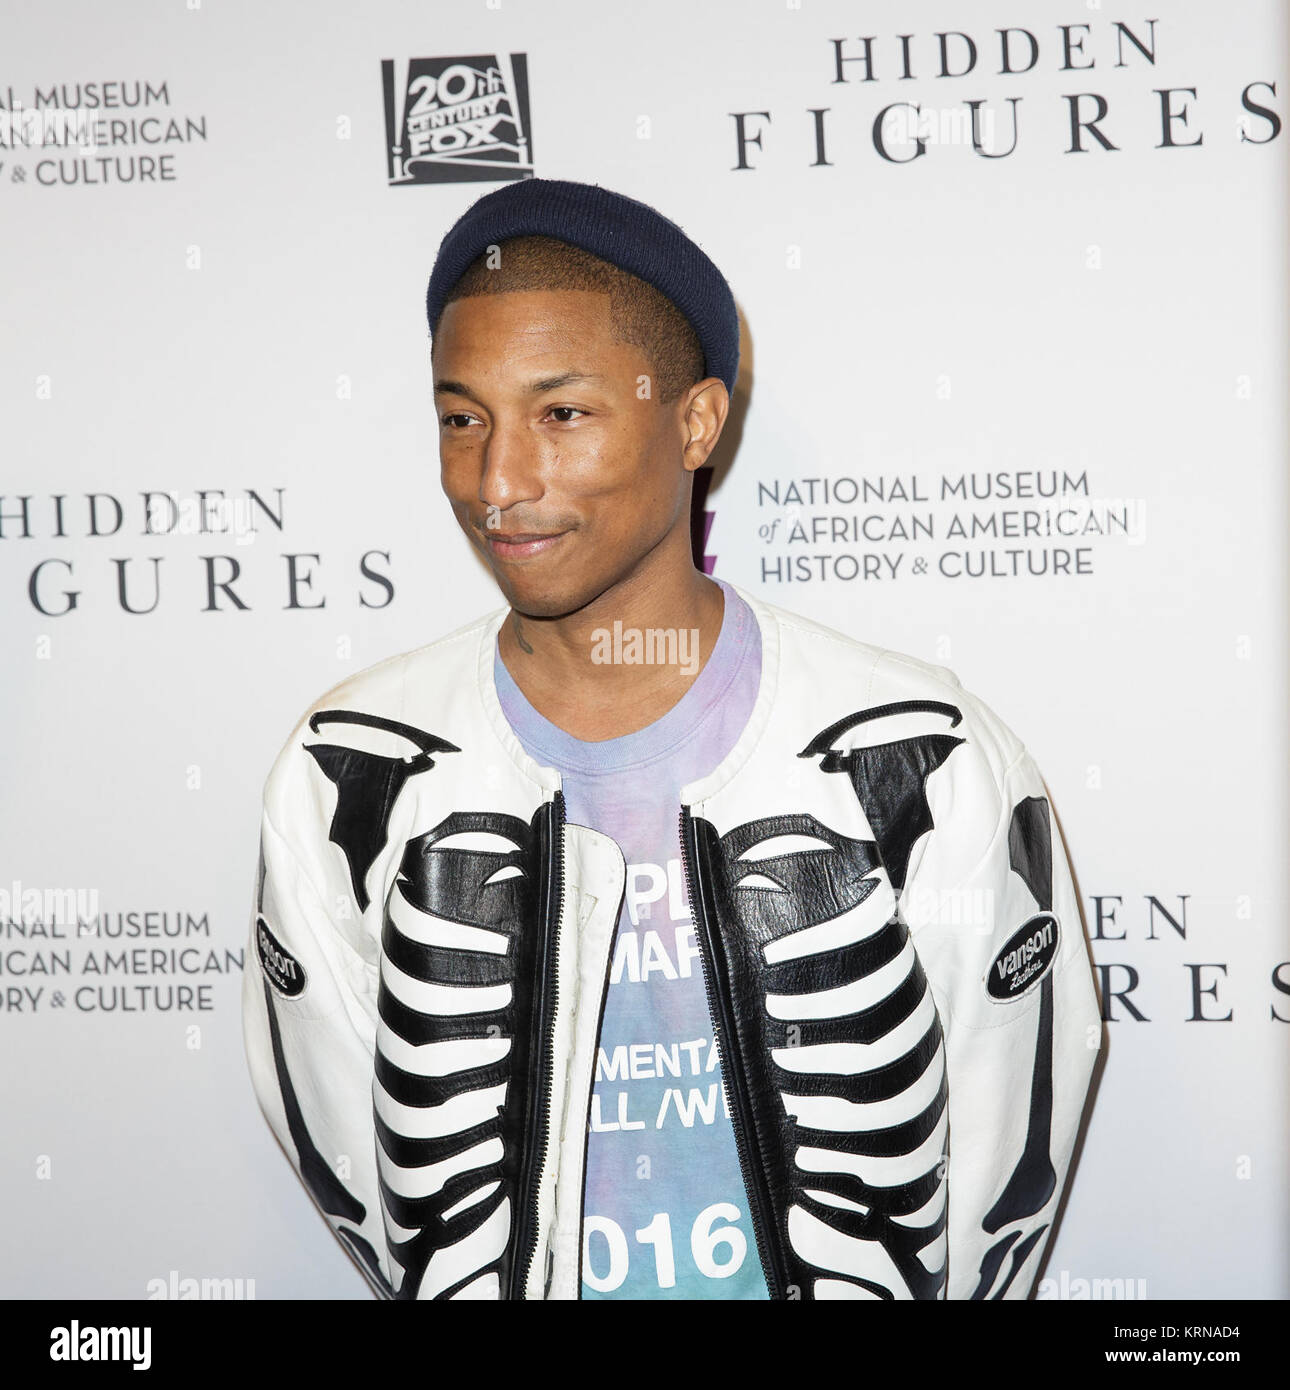 American singer-songwriter Pharrell Williams arrives on the red carpet for a screening of the film “Hidden Figures” at the Smithsonian’s National Museum of African American History and Culture, Wednesday, Dec. 14, 2016 in Washington DC. The film is based on the book of the same title, by Margot Lee Shetterly, and chronicles the lives of Katherine Johnson, Dorothy Vaughan and Mary Jackson -- African-American women working at NASA as “human computers,” who were critical to the success of John Glenn’s Friendship 7 mission in 1962. Photo Credit: (NASA/Joel Kowsky) 22Hidden Figures22 Screening at N Stock Photo